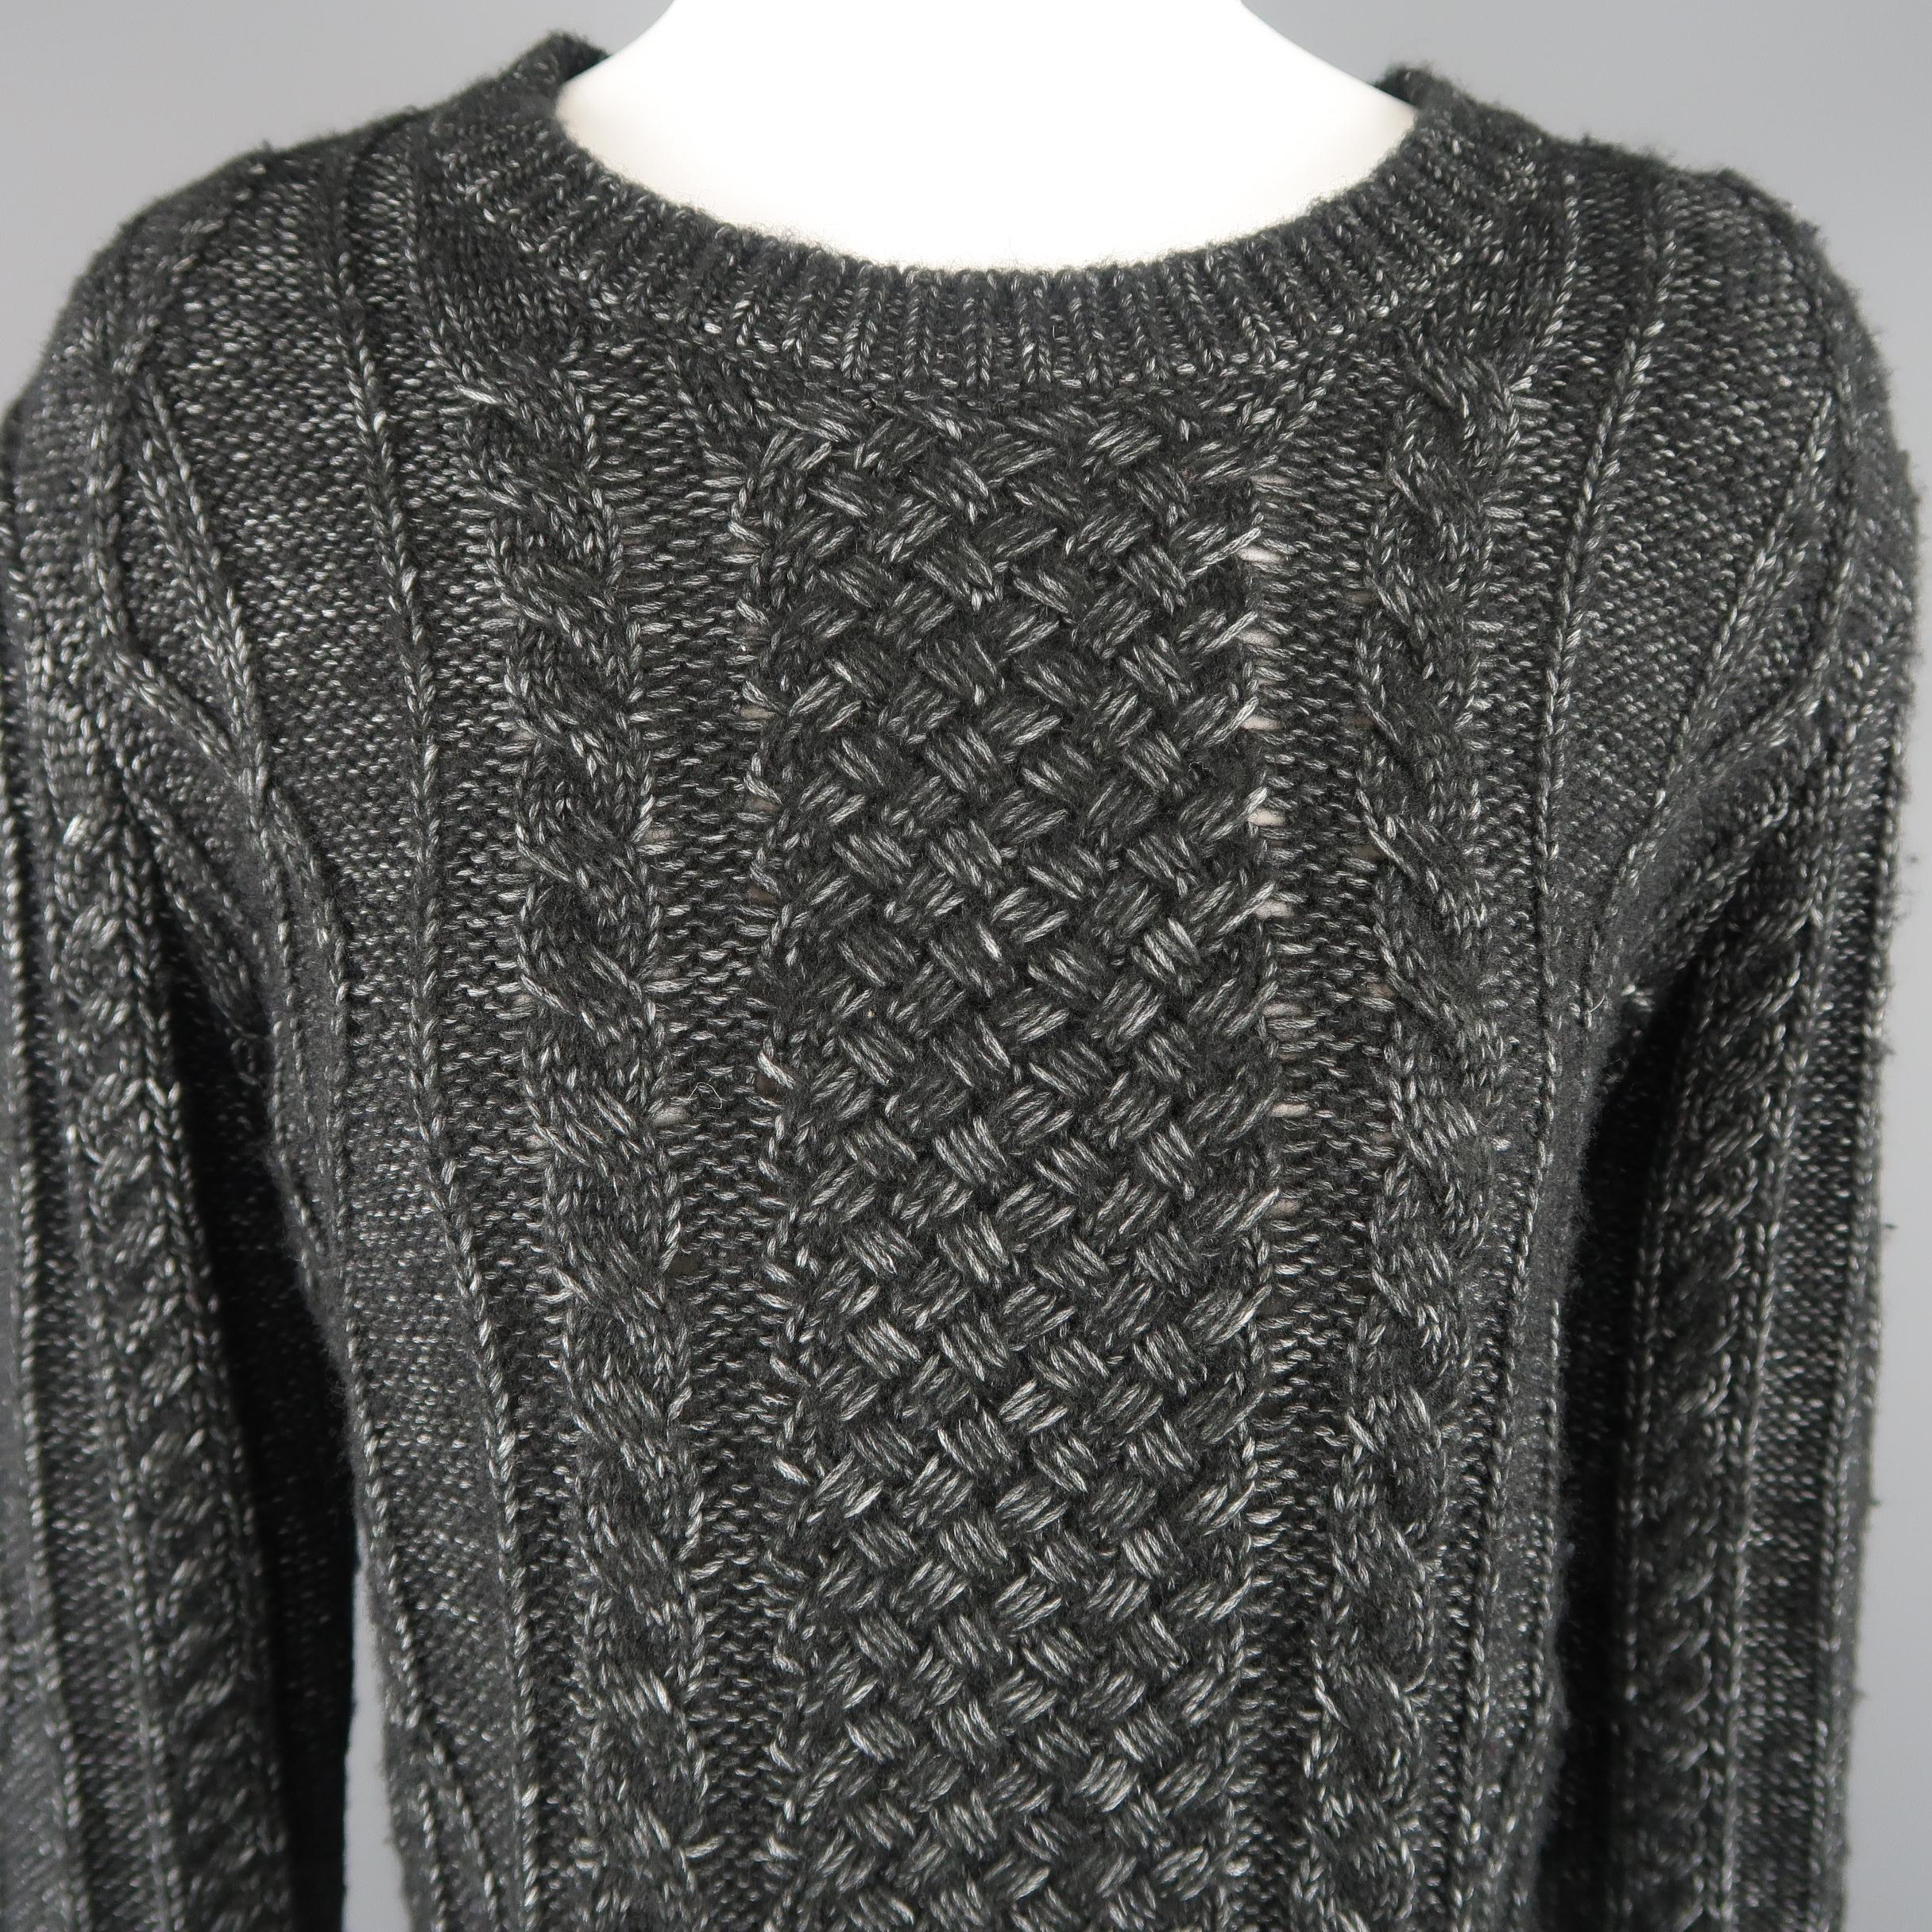 DEREK LAM pullover sweater comes in charcoal heathered cable knit with a crewneck and slit sides.
 
New with Tags.
Marked: M
 
Measurements:
 
Shoulder: 18 in.
Bust: 42 in.
Sleeve: 25 in.
Length: 24 in.